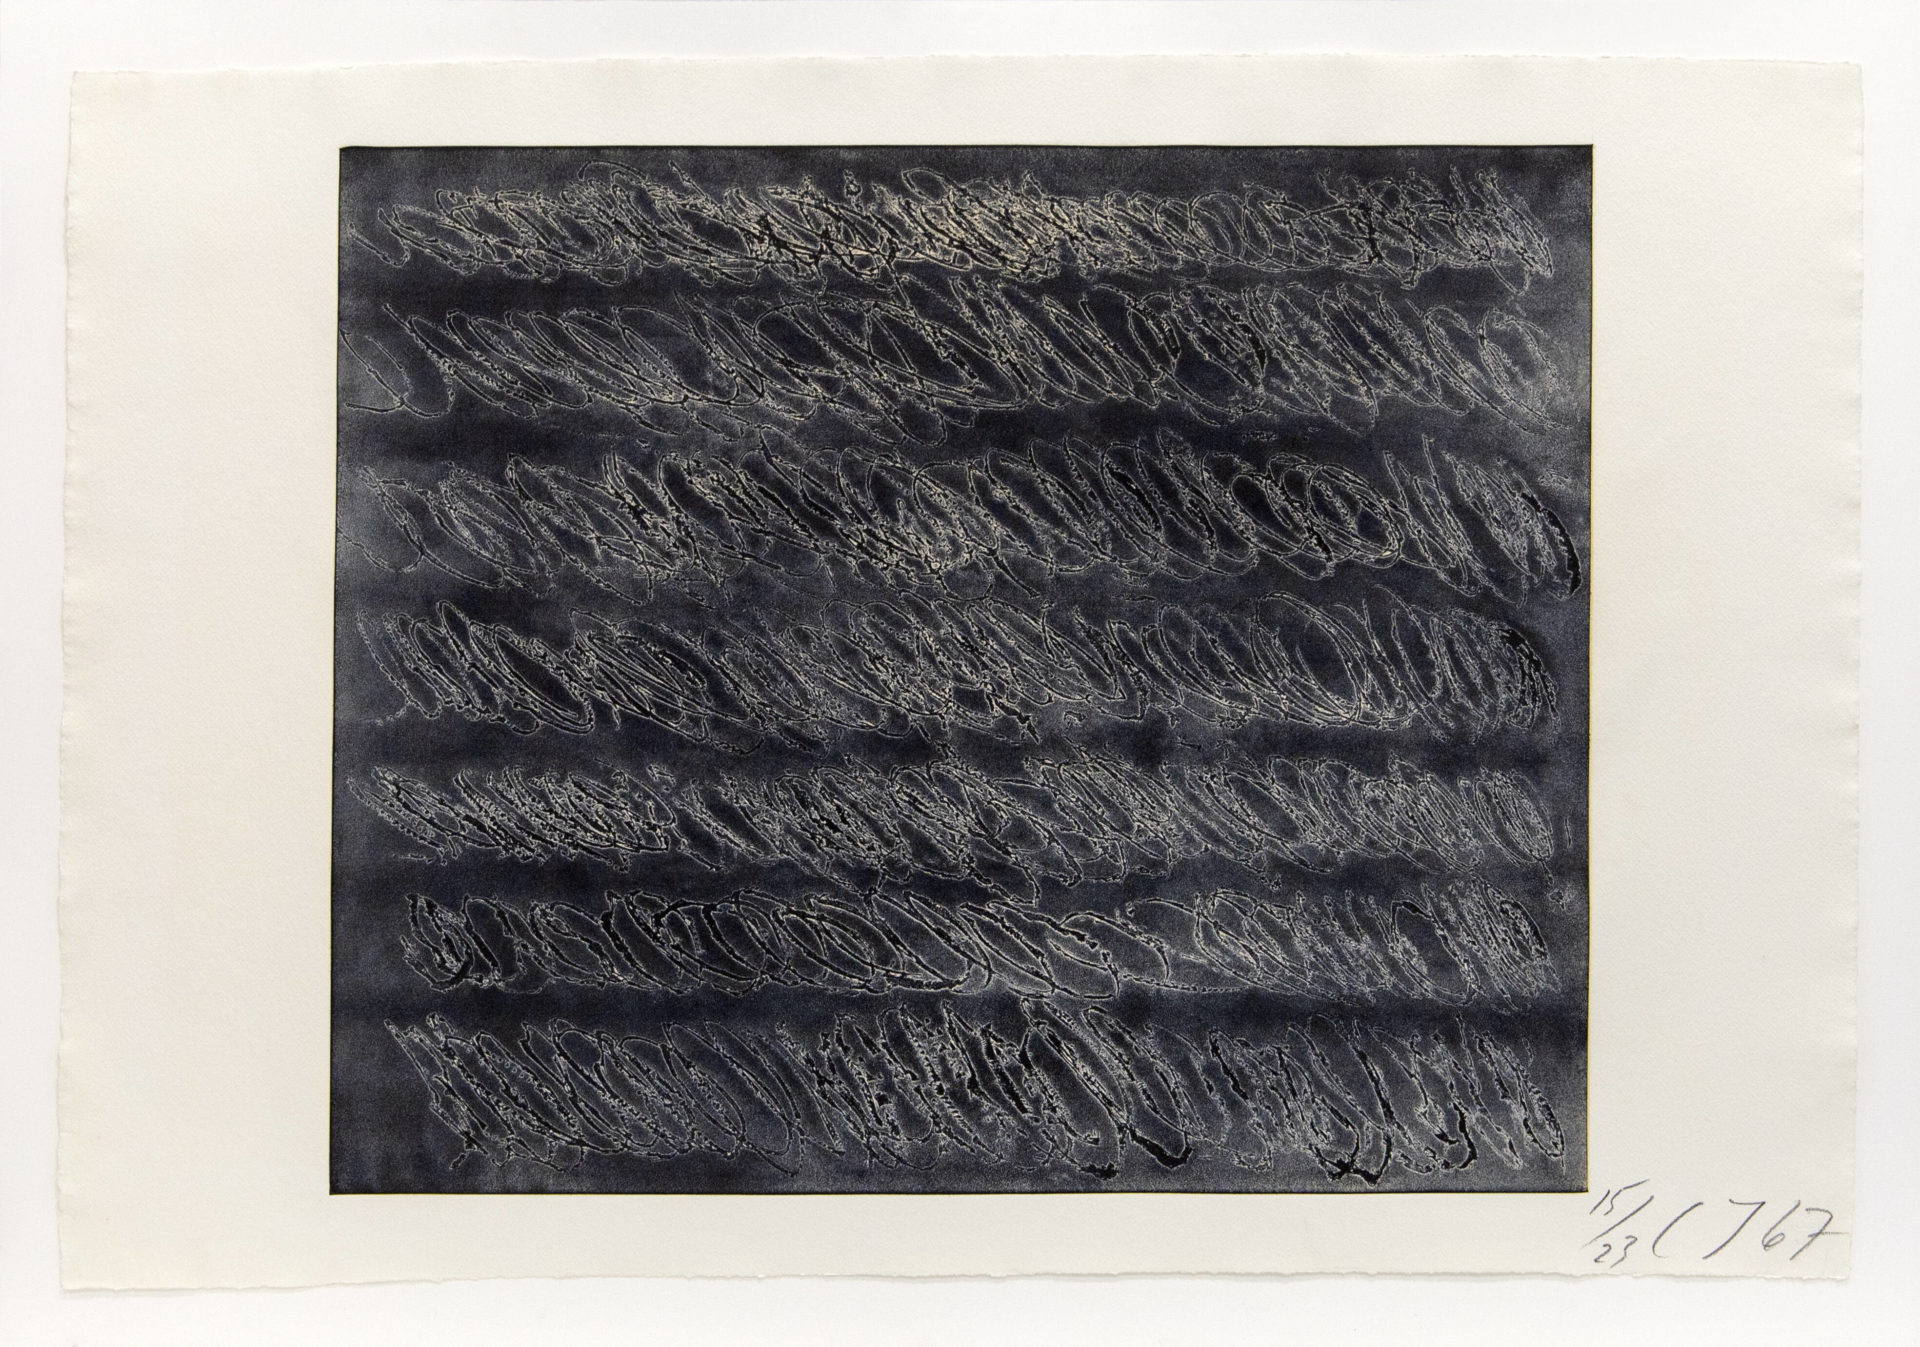 Untitled II, 1967, Etching and aquatint, 27 x 40 1/4 inches (68.6 x 102.2 cm), Edition of 23